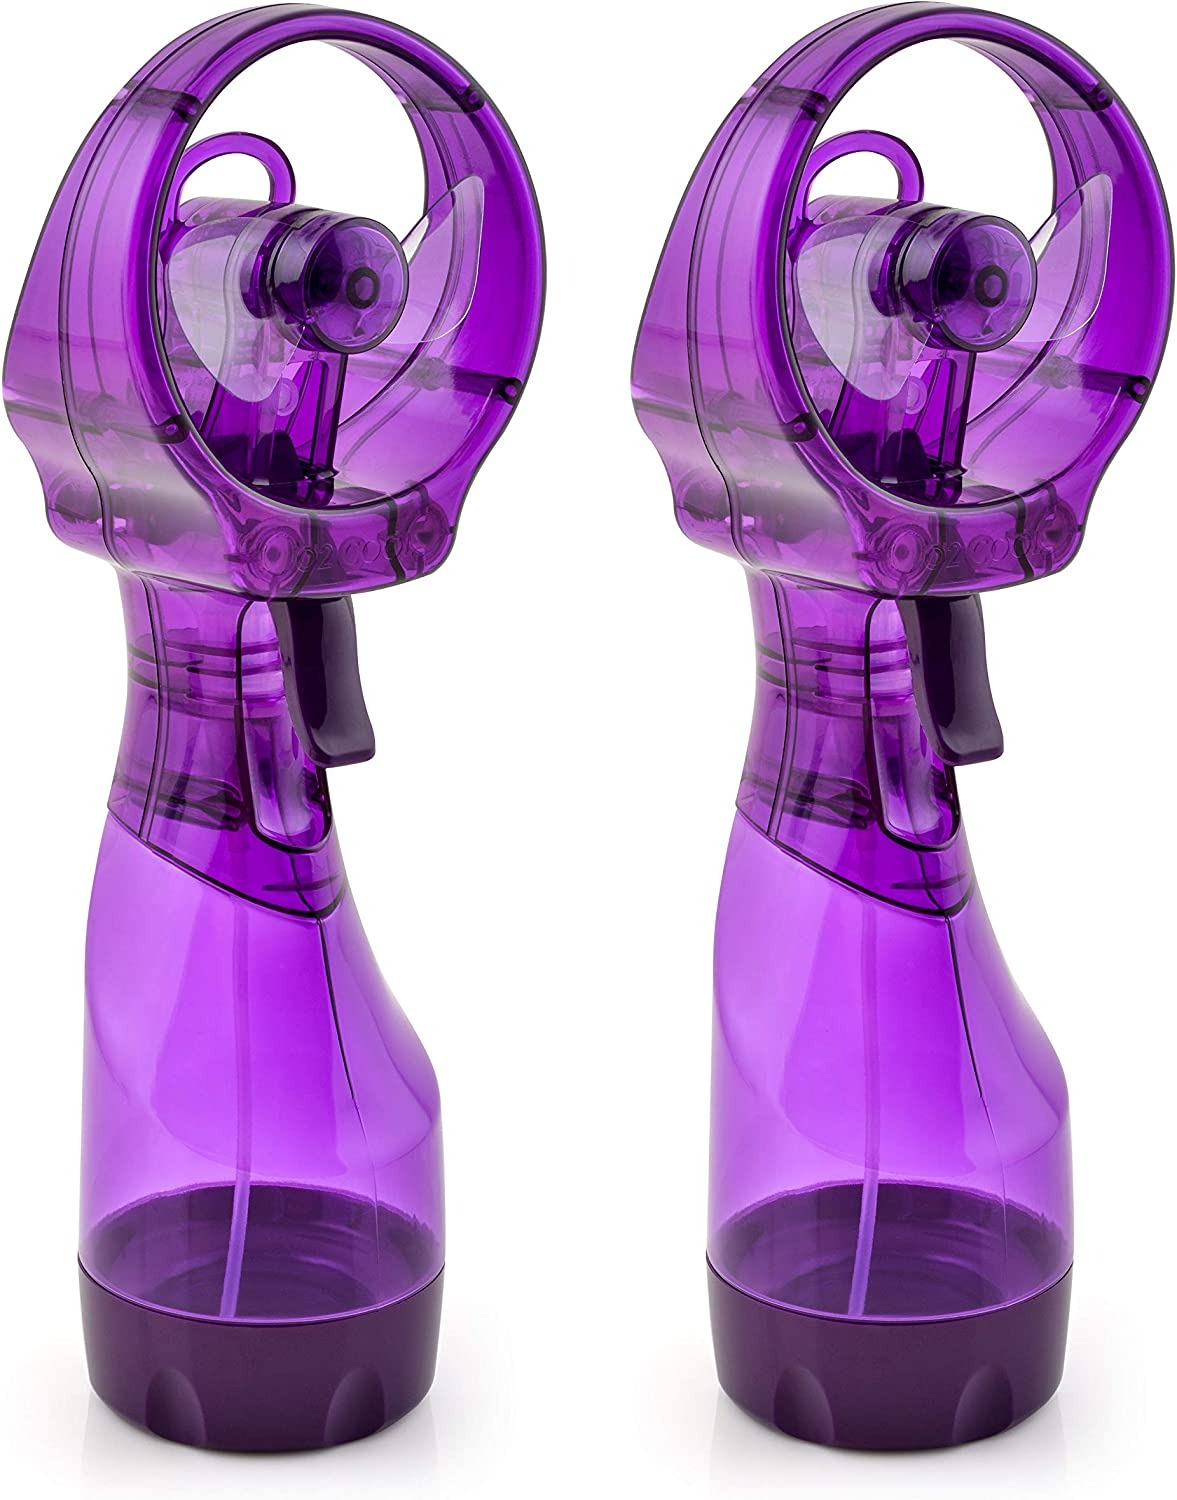 O2COOL Deluxe Handheld Battery Powered Water Misting Fan - 2 Adet - Purple